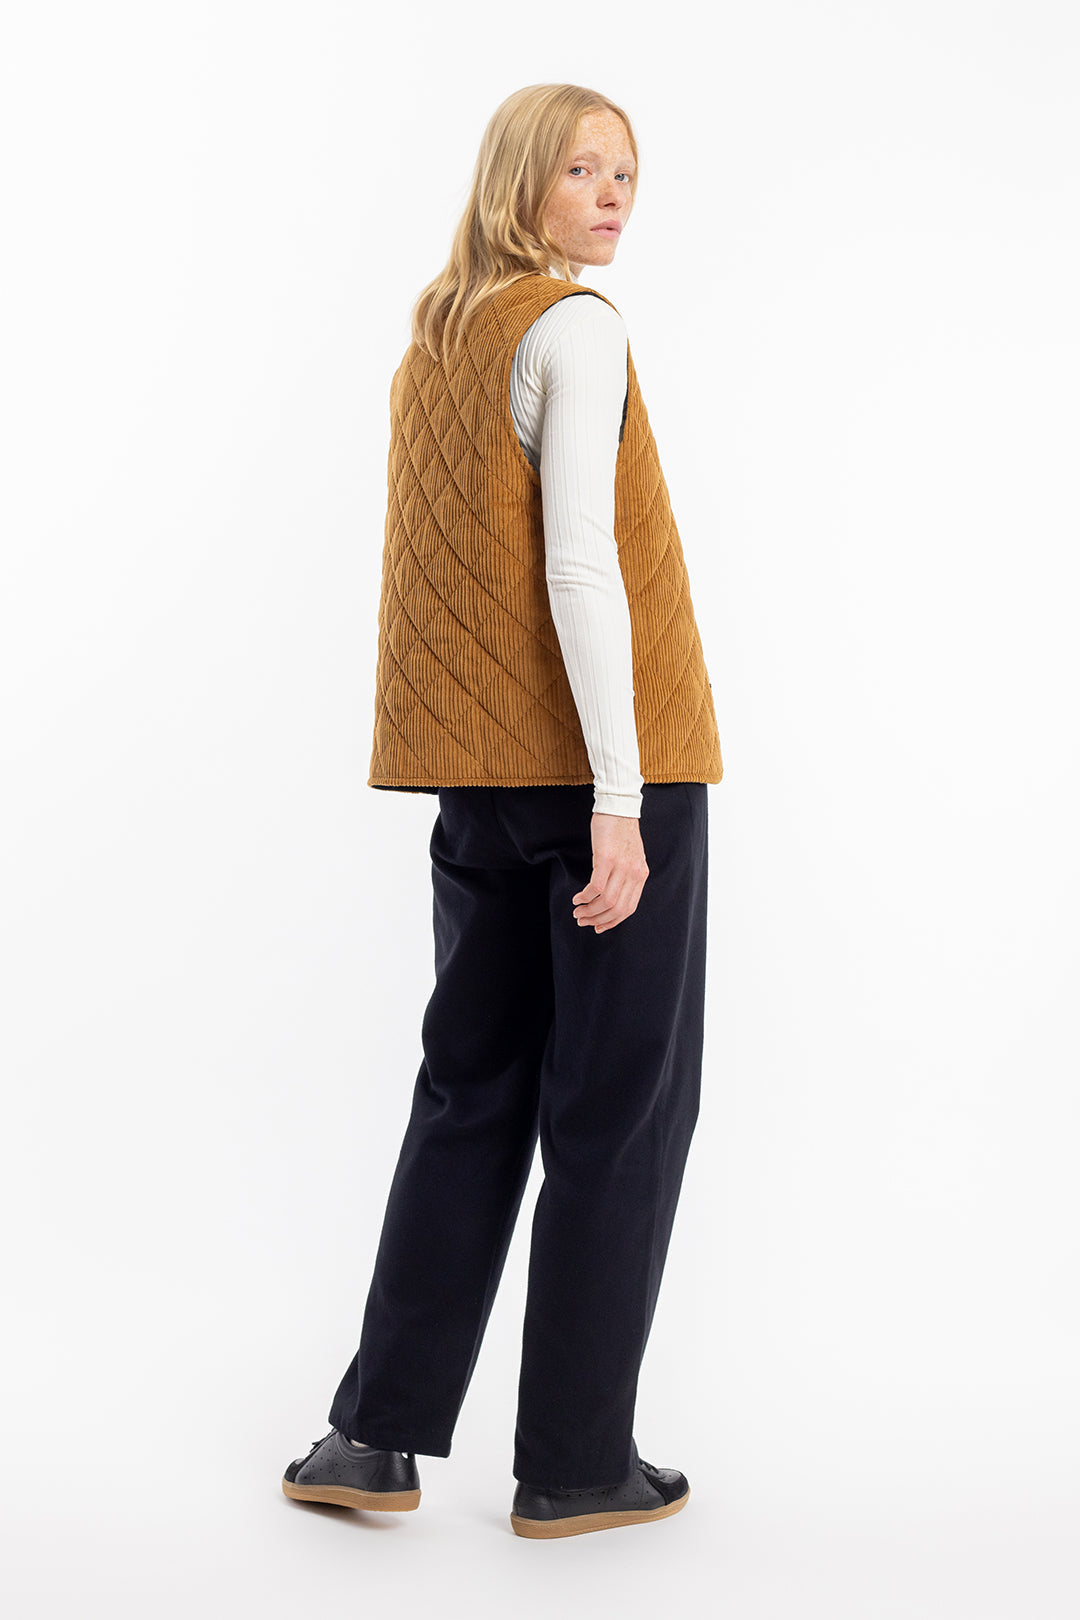 Toffee, quilted corduroy vest made from organic cotton &amp; recycled PET from Rotholz